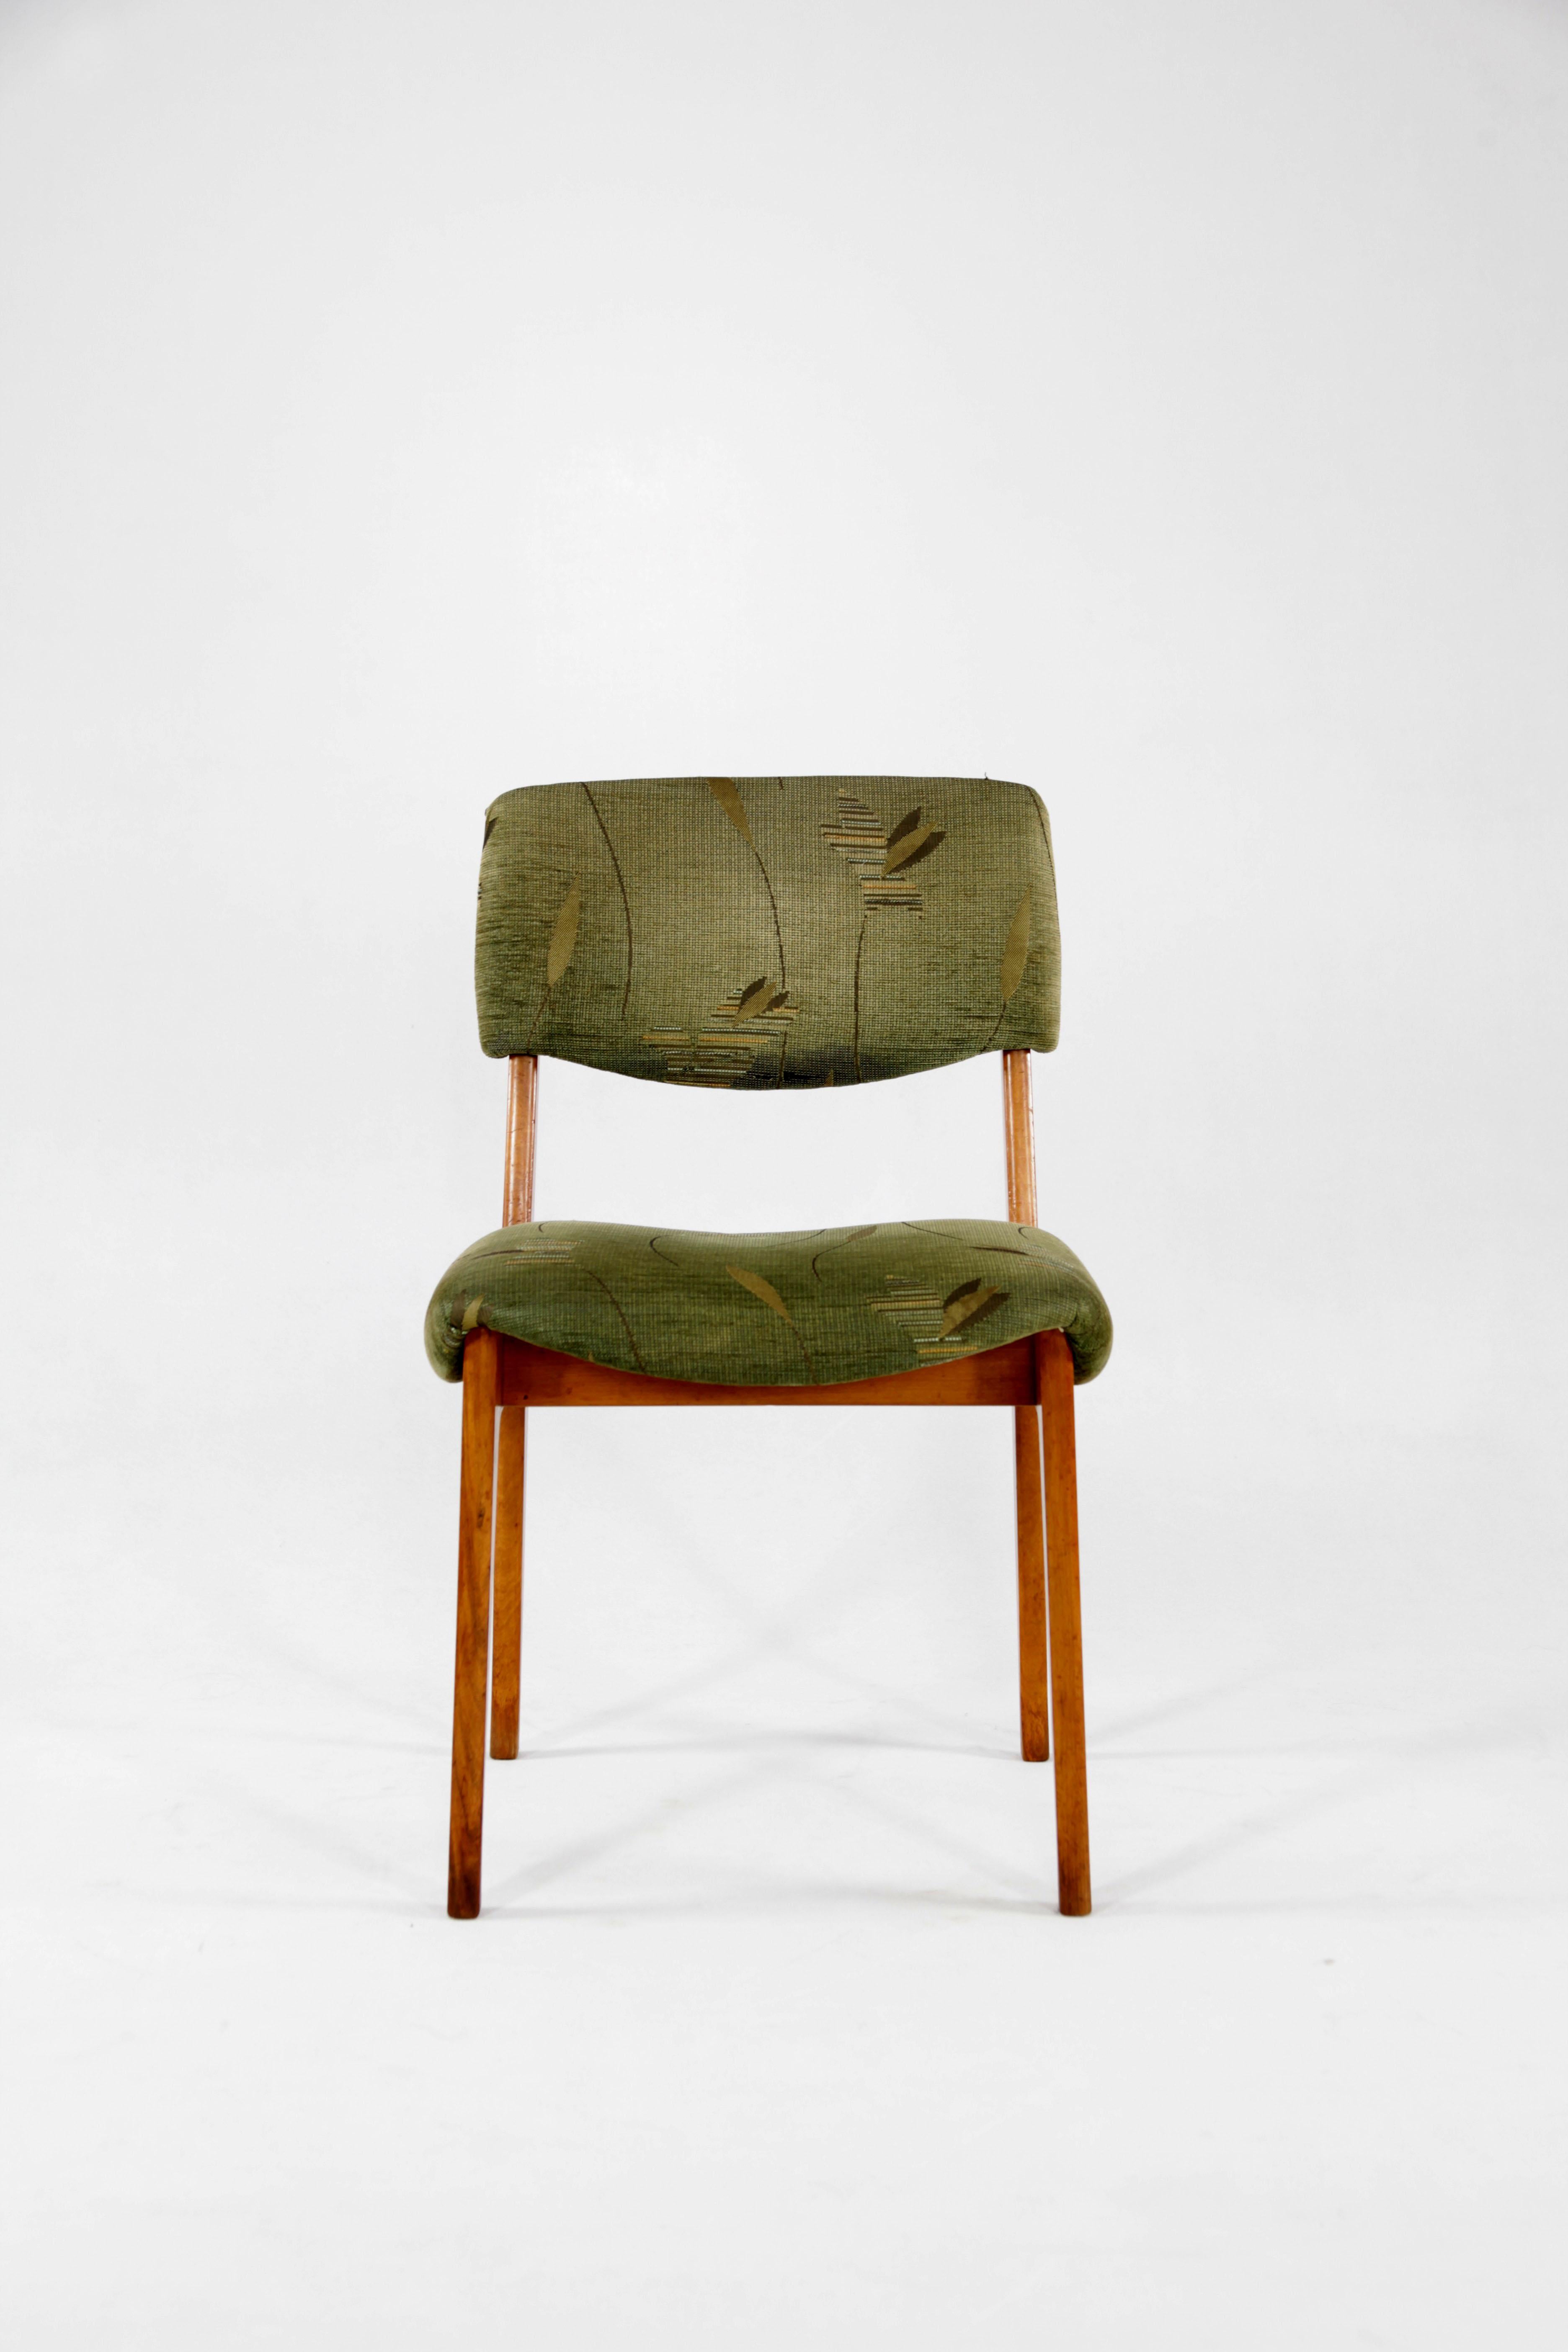 This set of six Italian chairs was designed by Ico Parisi and manufactured by M.I.M. Roma in the 1950s. The combination of the green upholstery and the wood creates a balanced design. We also have a matching table by Ico Parisi.

Do not hesitate to